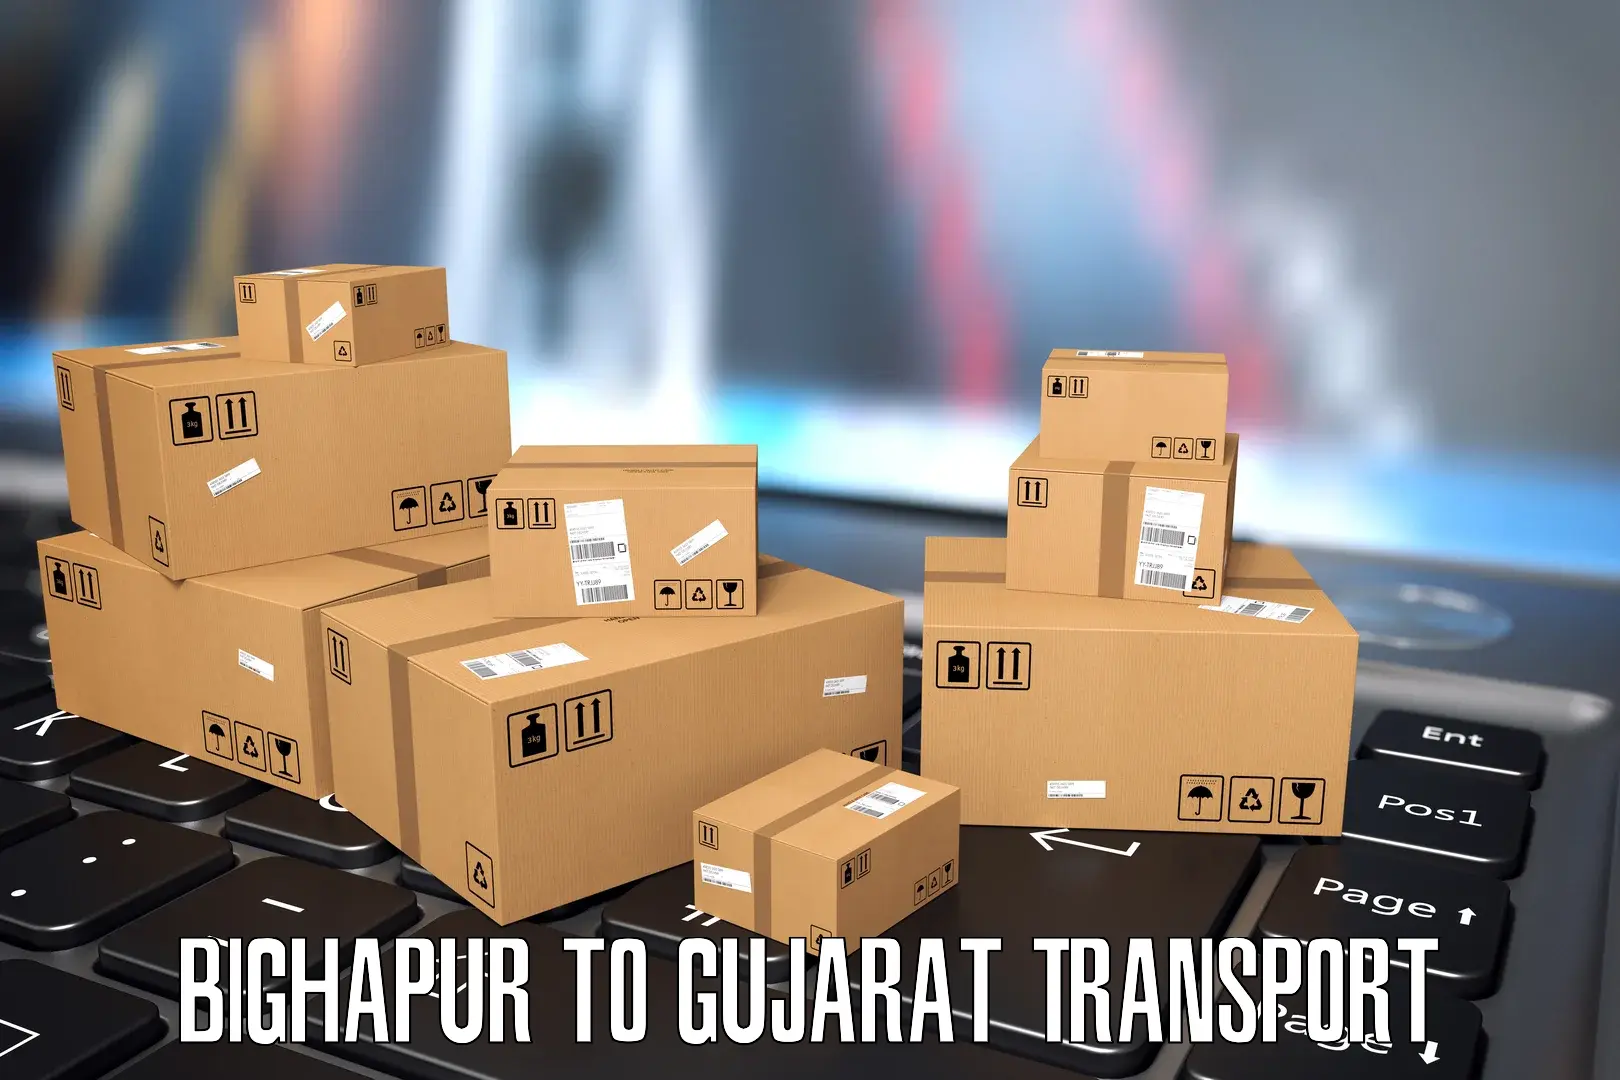 Commercial transport service Bighapur to Dabhoi